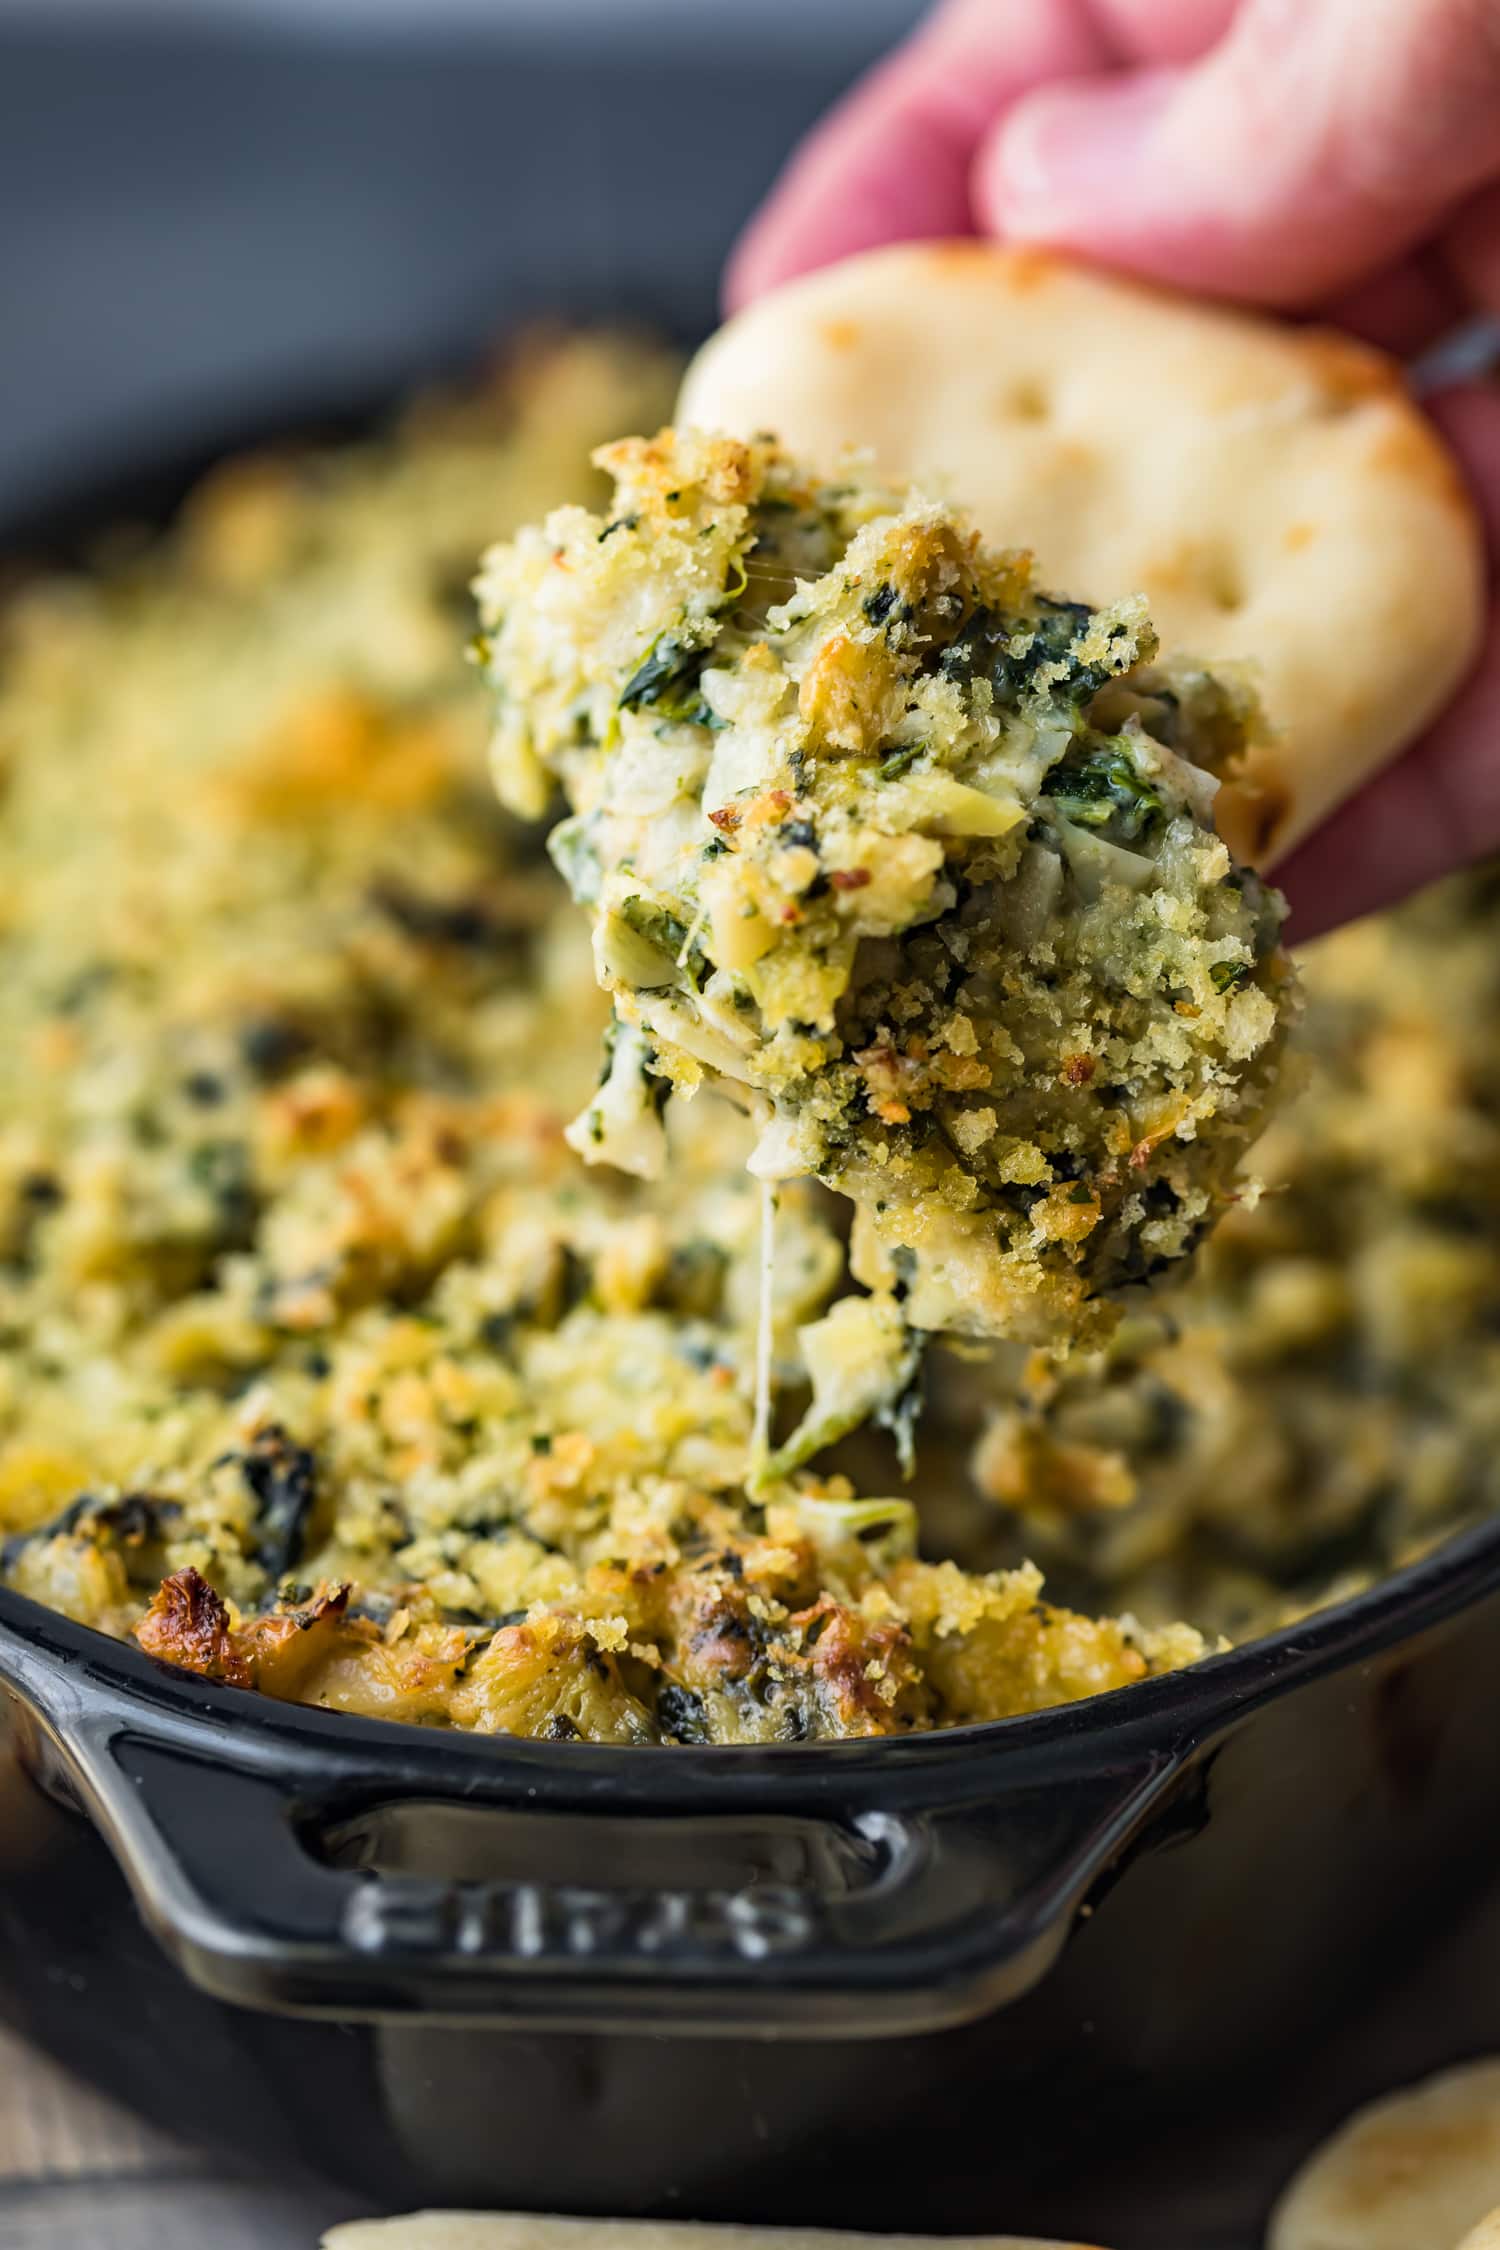 Baked Spinach Artichoke Dip on a cracker